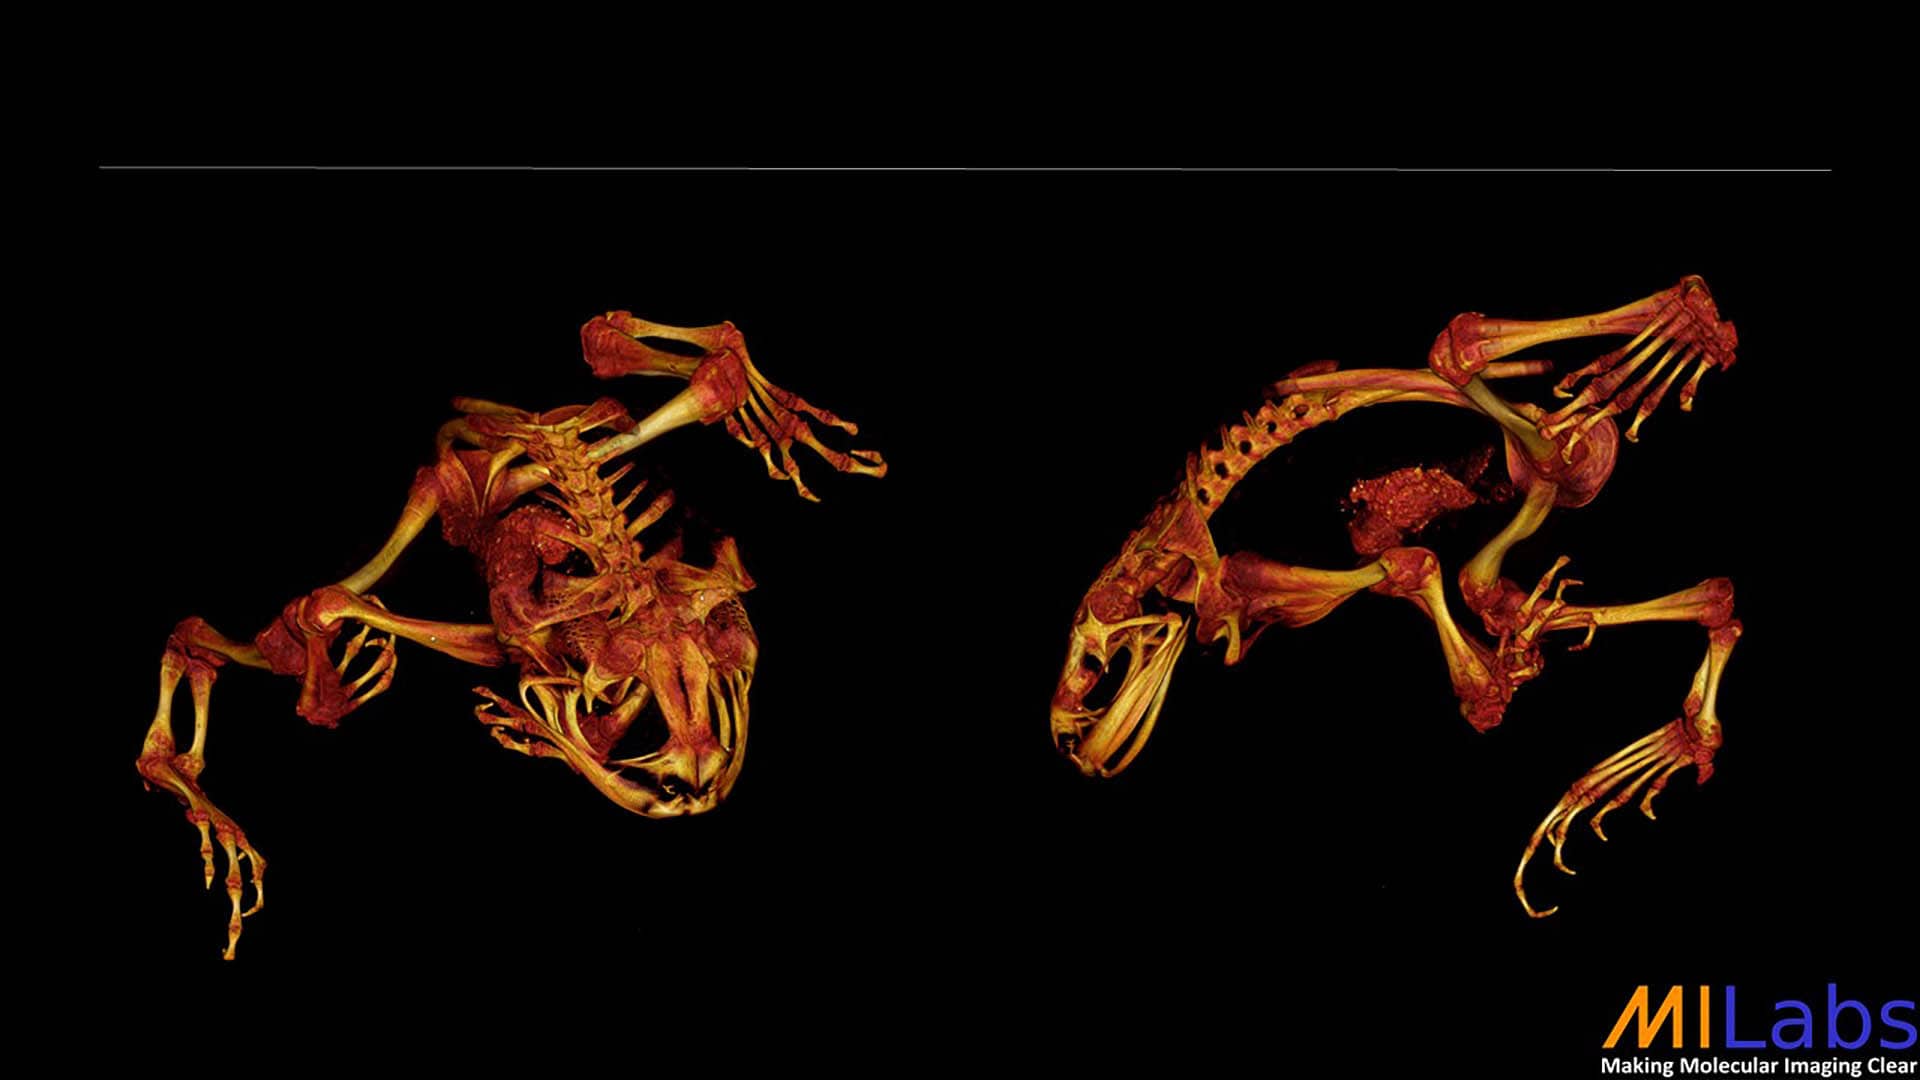 microCT imaging of a frog